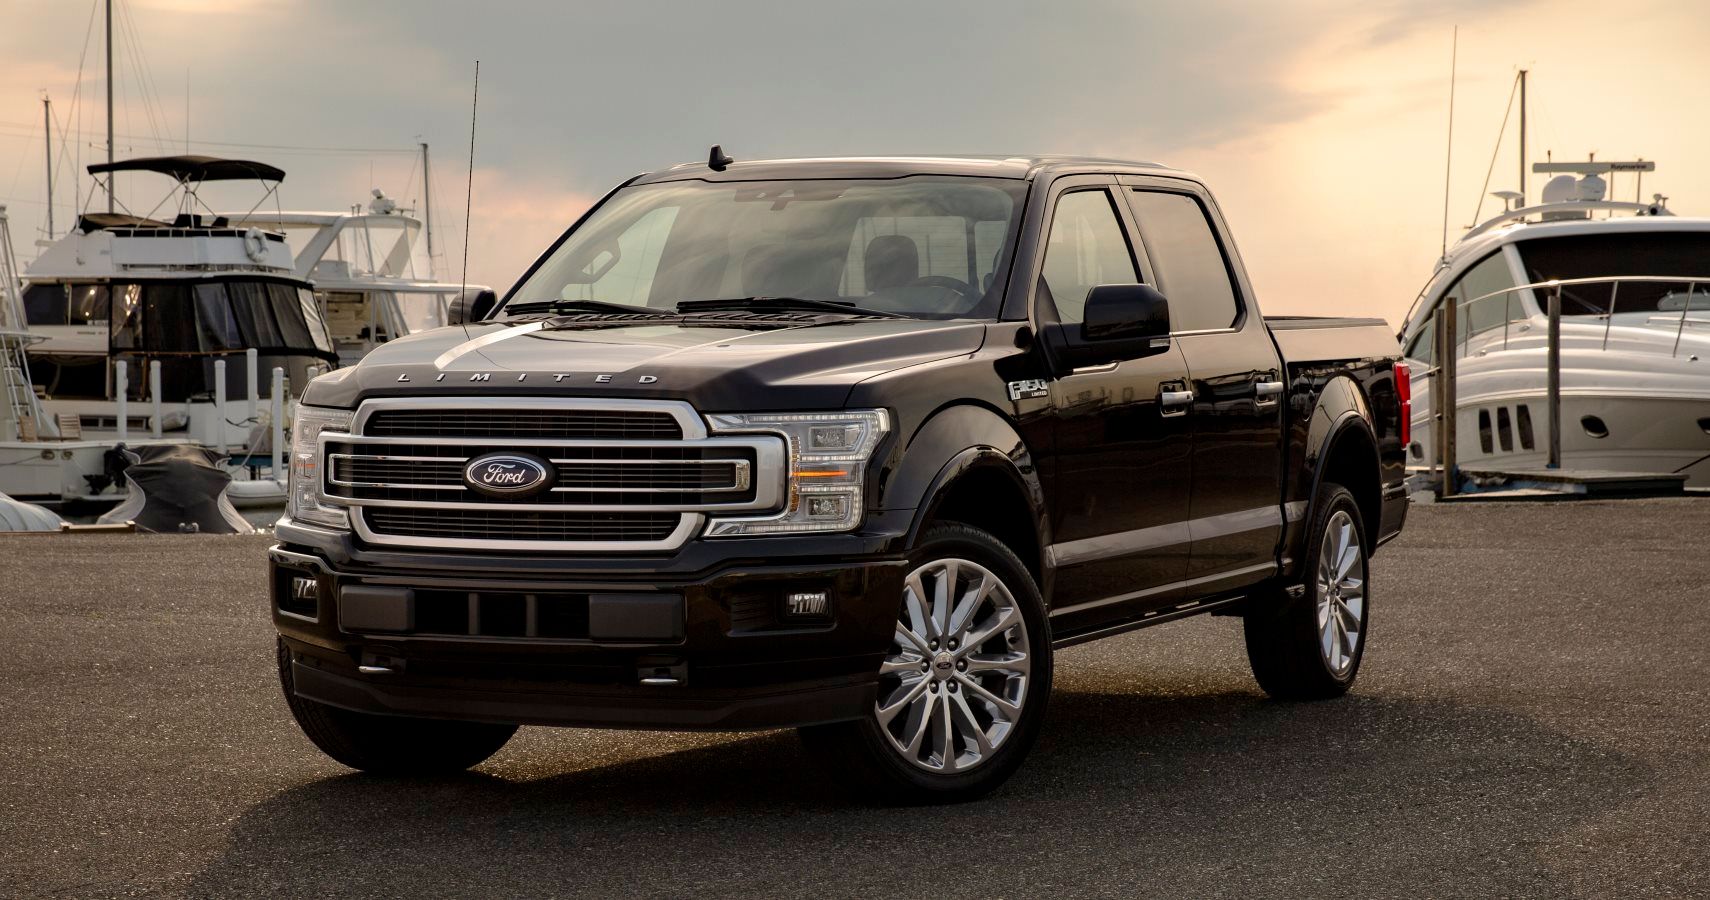 Thanks to the addition of a high-output 3.5-liter EcoBoost® V6 engine, the 2019 Ford F-150 Limited is the most powerful light-duty pickup in America.